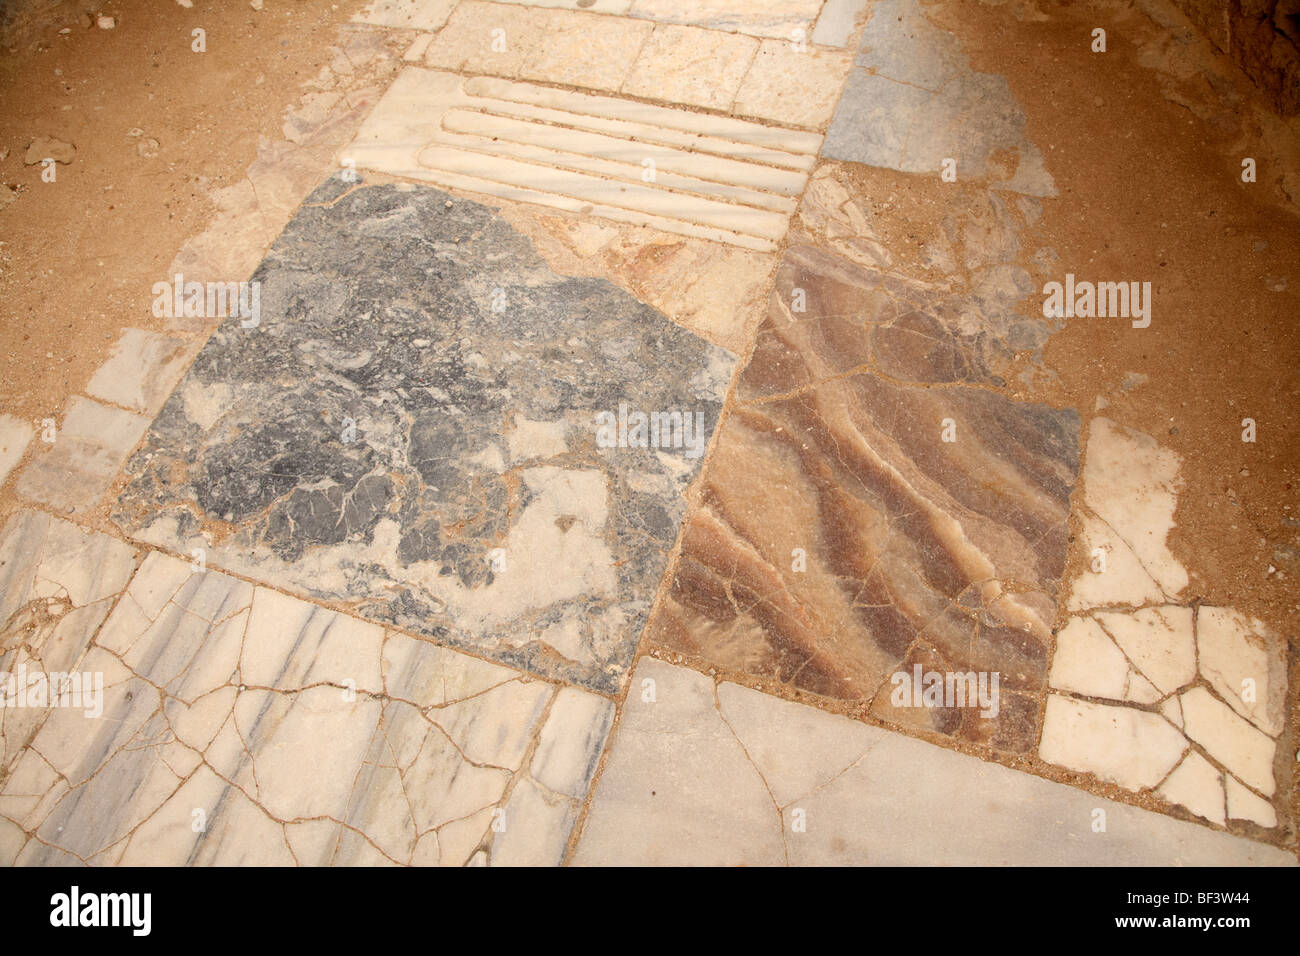 marble tiles on the sudatorium floor in the gymnasium and baths in the ancient site of old roman villa salamis famagusta Stock Photo